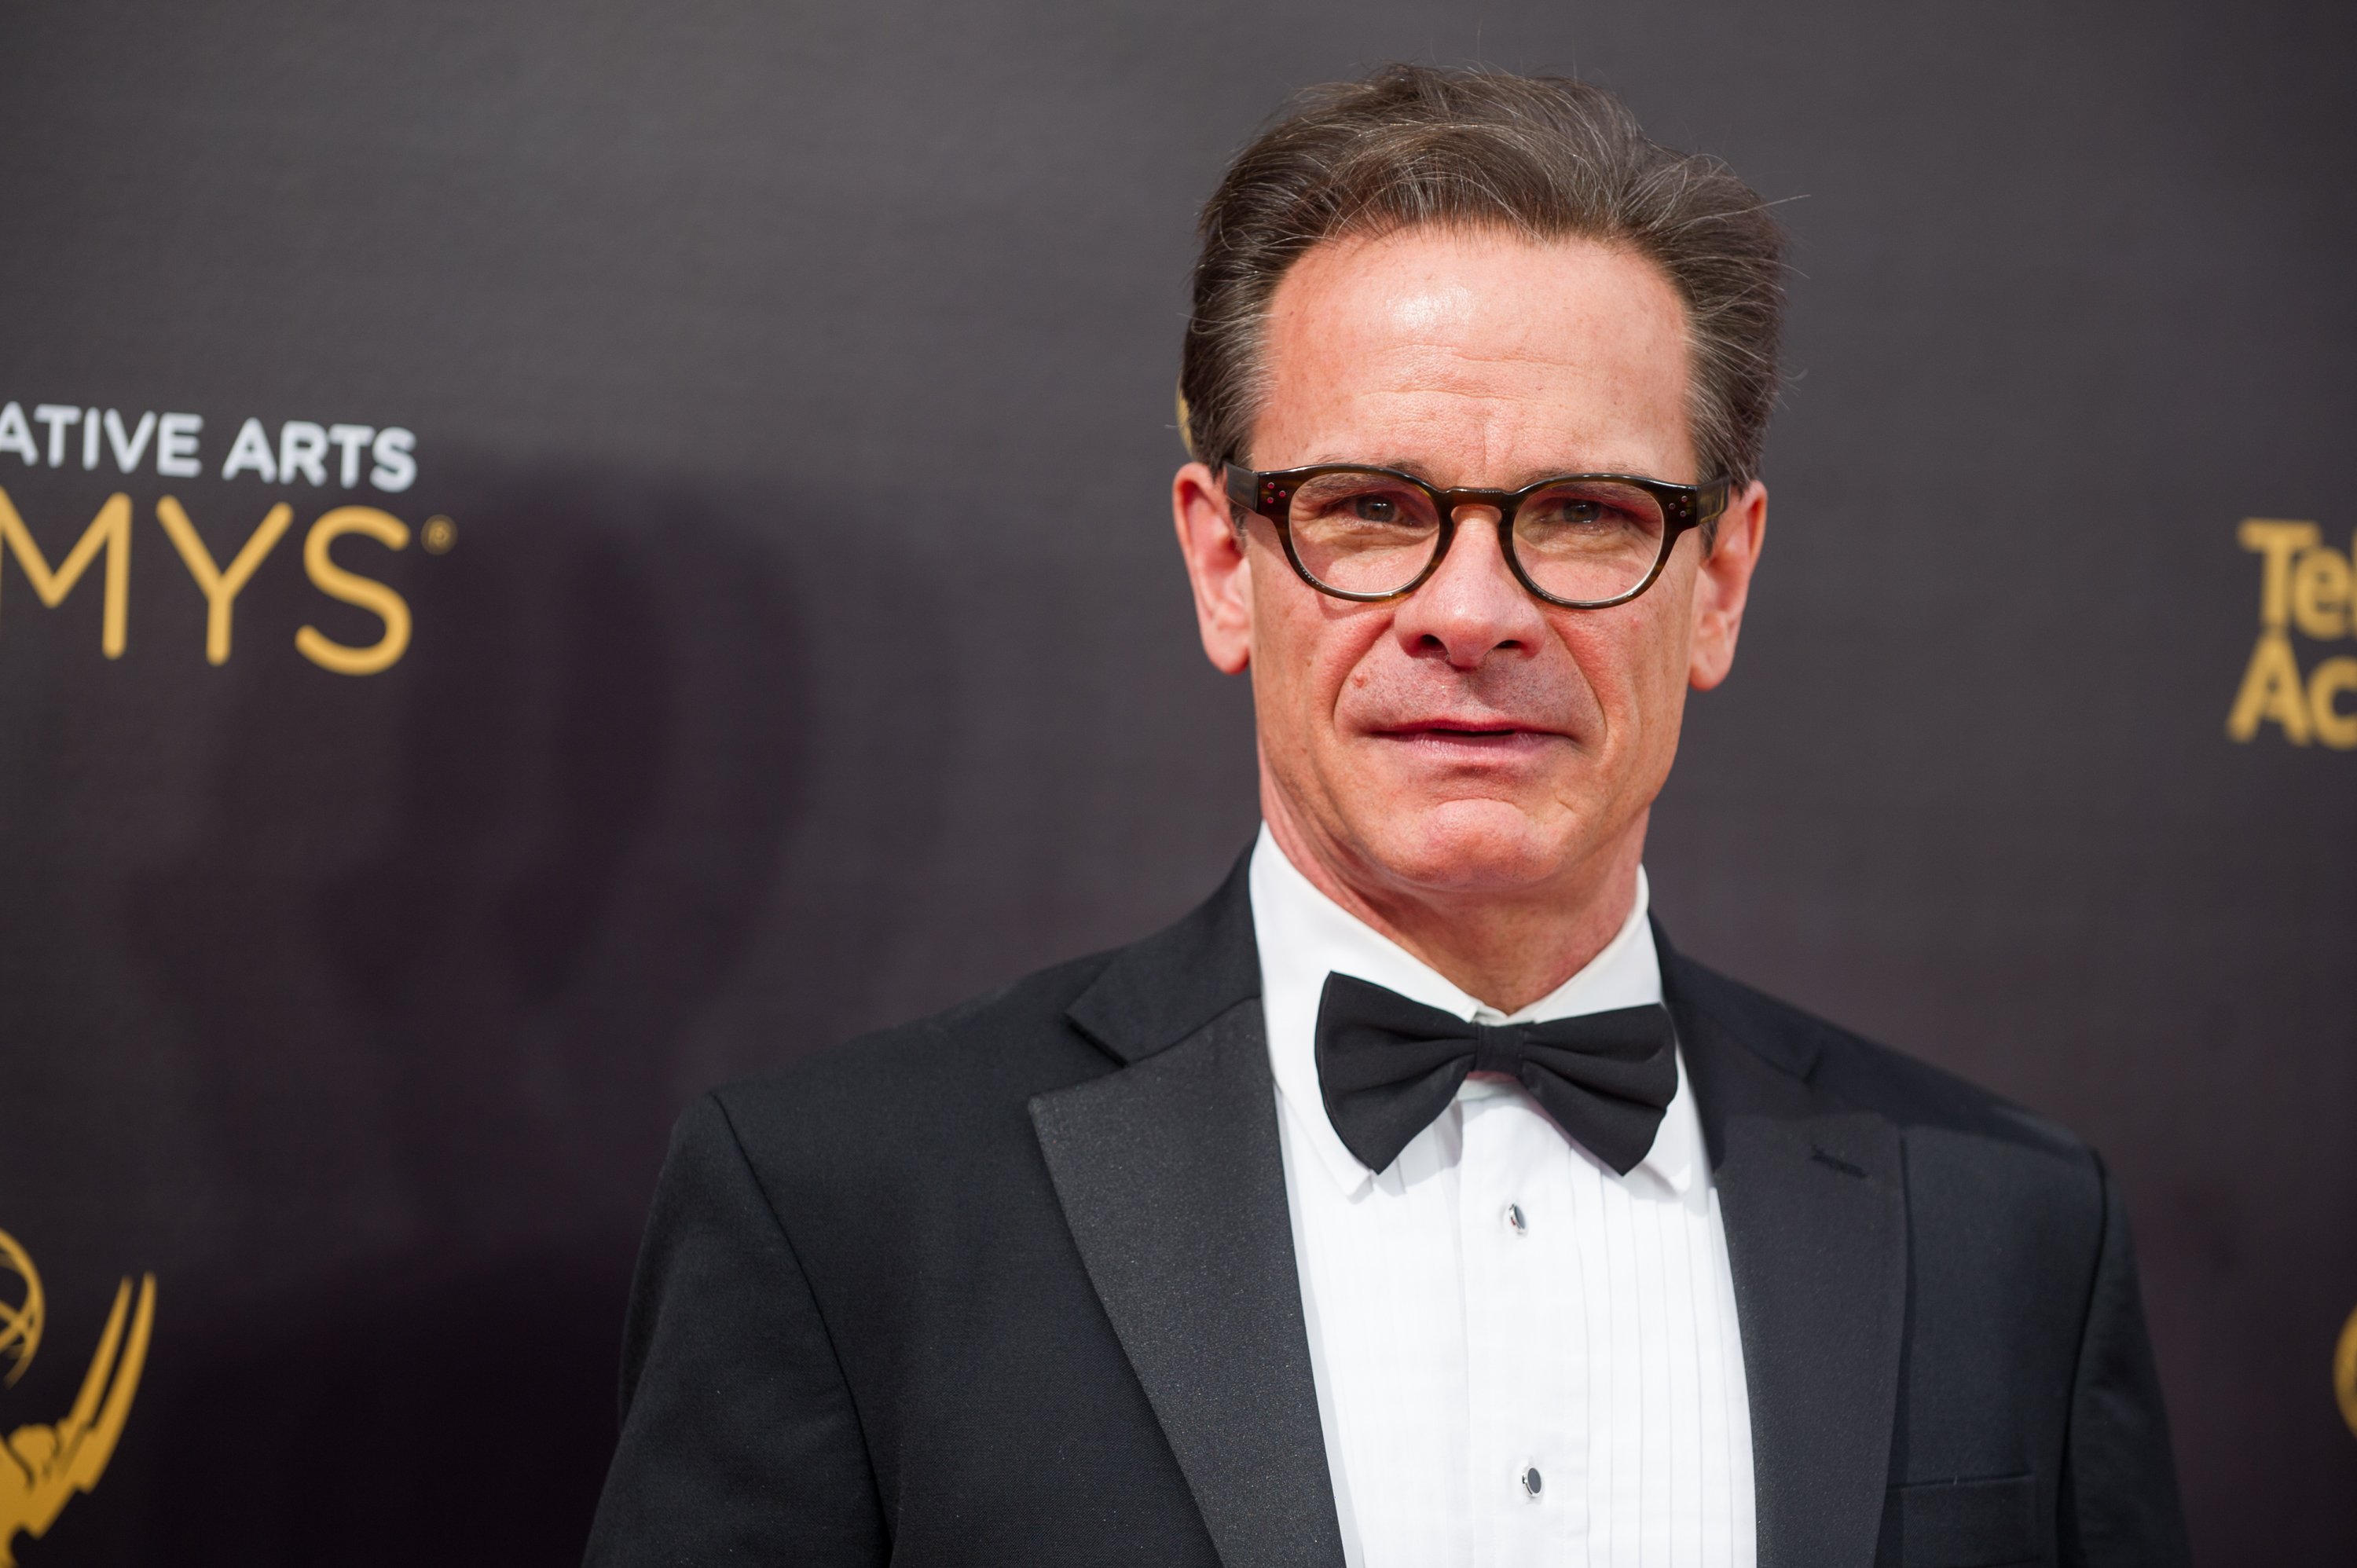 Peter Scolari arrives at the Creative Arts Emmy Awards at Microsoft Theater on September 10, 2016 in Los Angeles, California | Photo: GettyImages